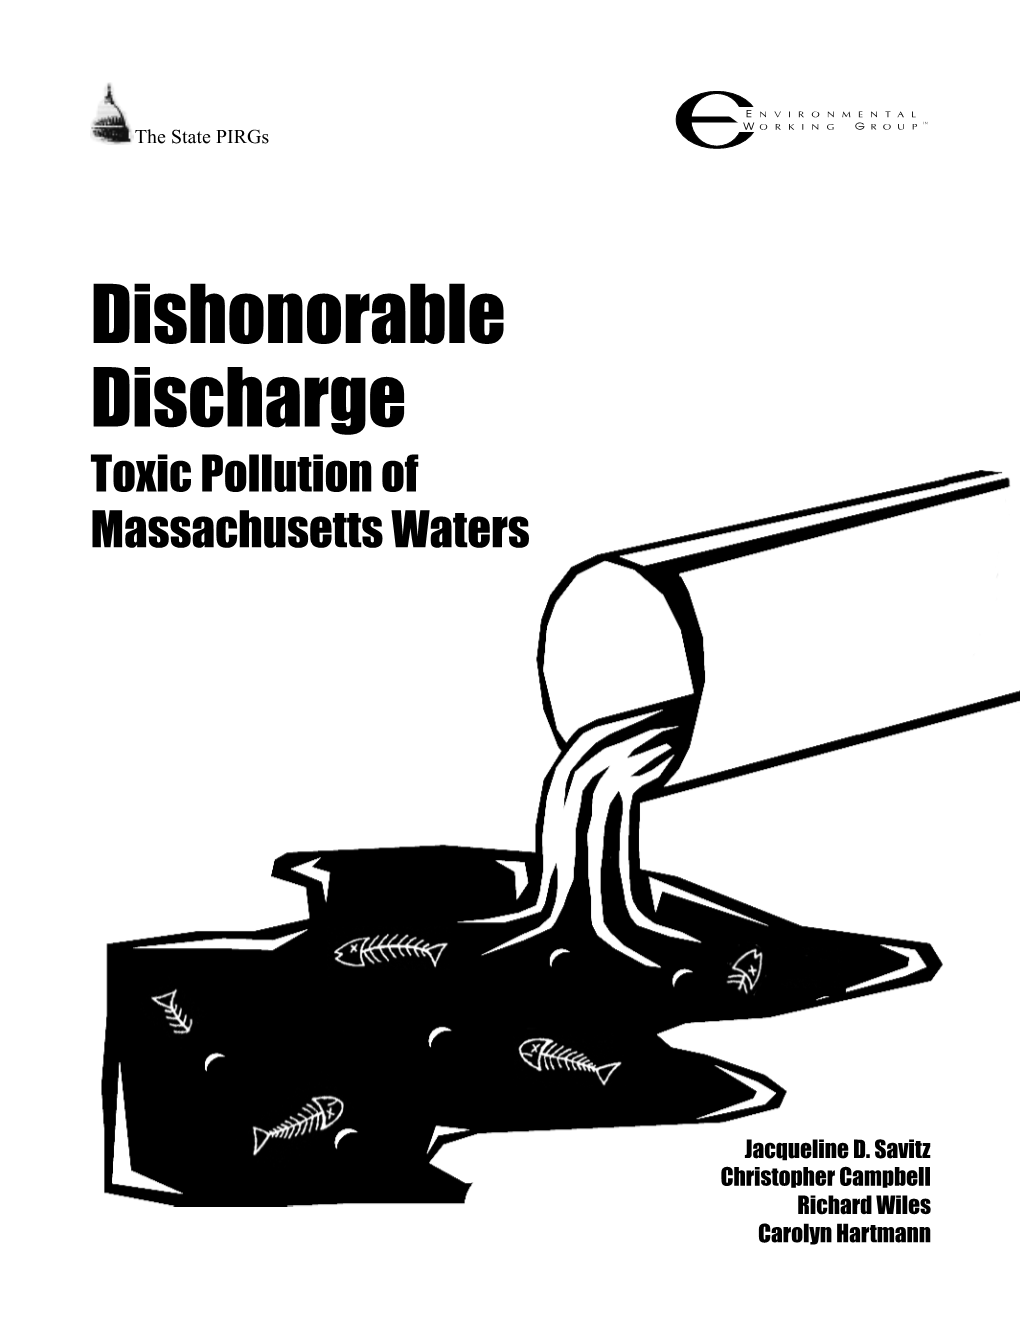 The Acushnet River in Massachusetts Total Toxic Pollution Reported (1990-1994): 15,945 Pounds